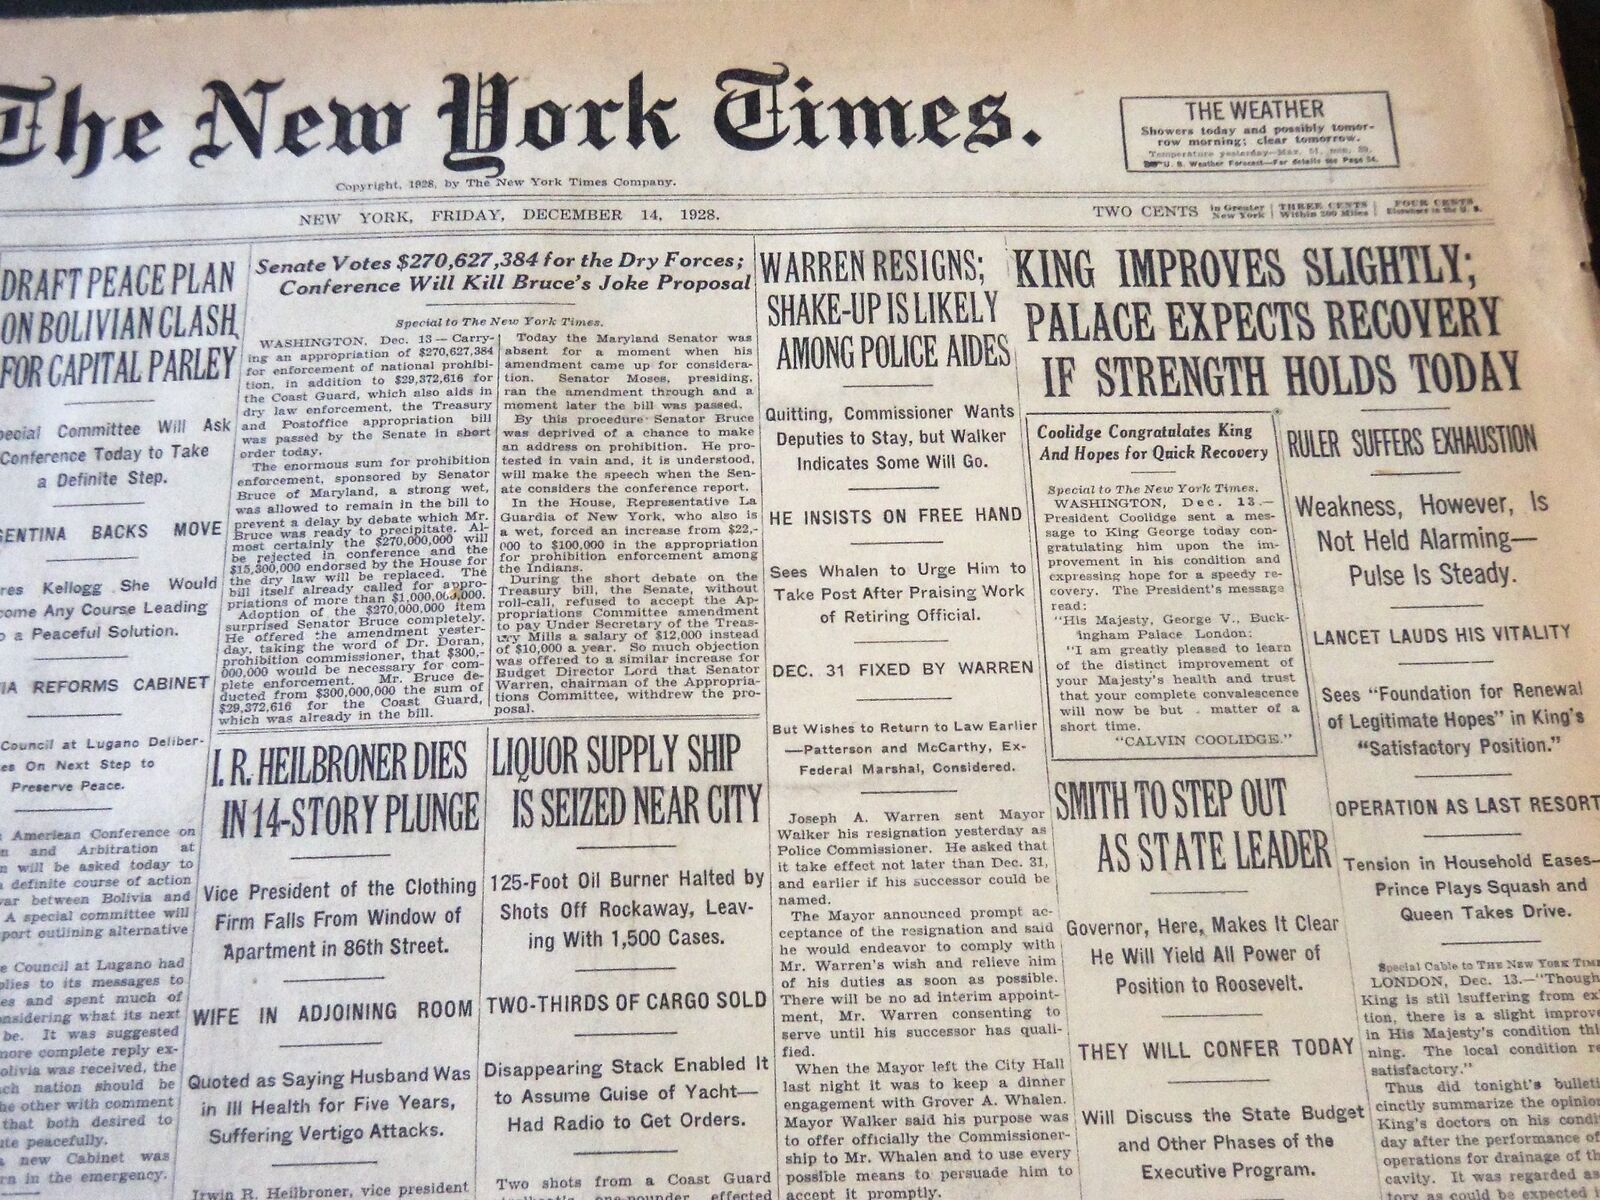 1928 DEC 14 NEW YORK TIMES - KING IMPROVES SLIGHTLY PALACE RECOVERY - NT 6522